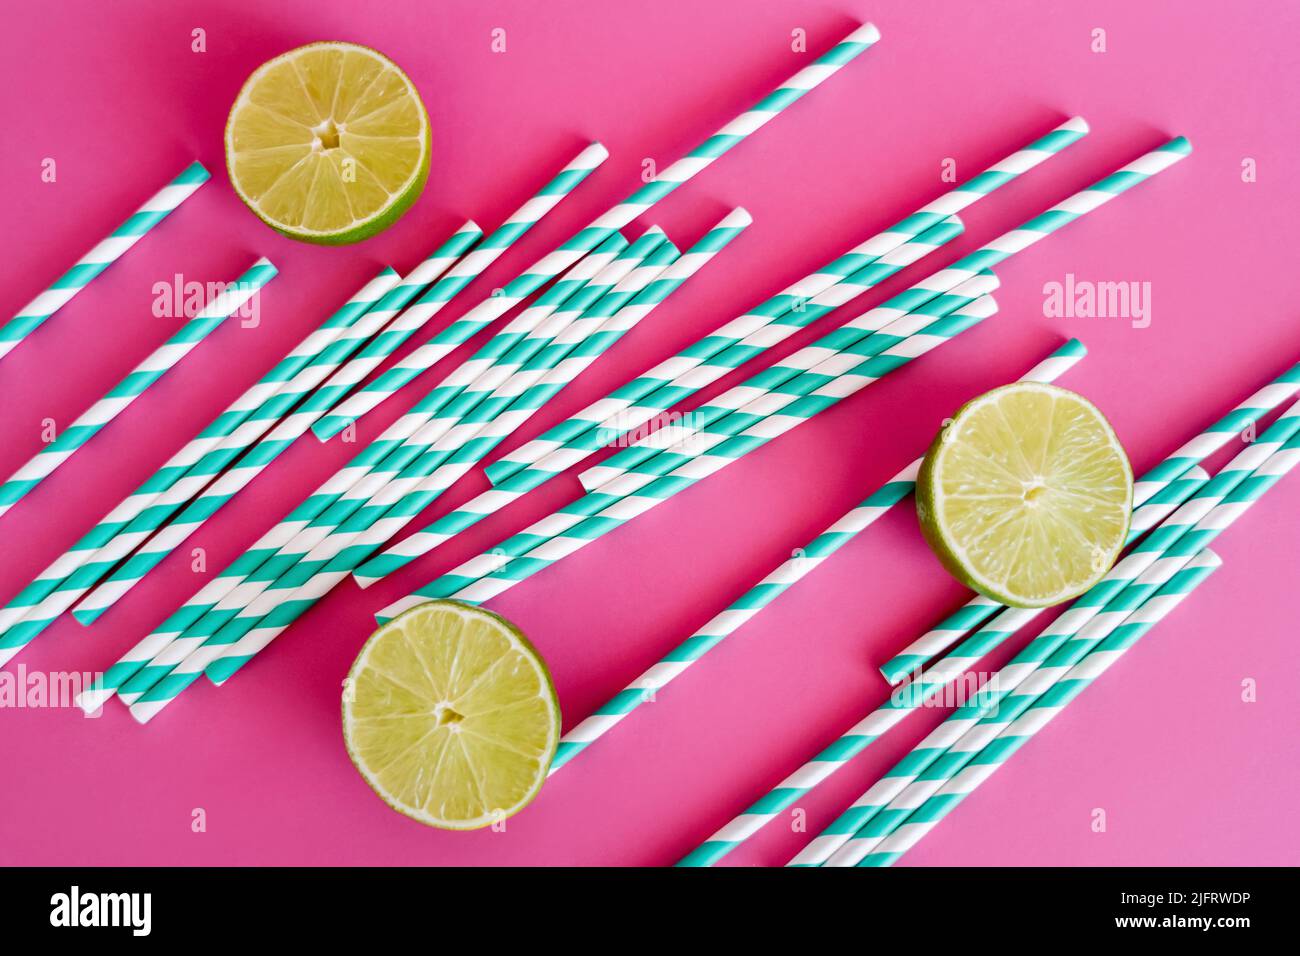 top view of striped blue and white straws near limes on pink background Stock Photo